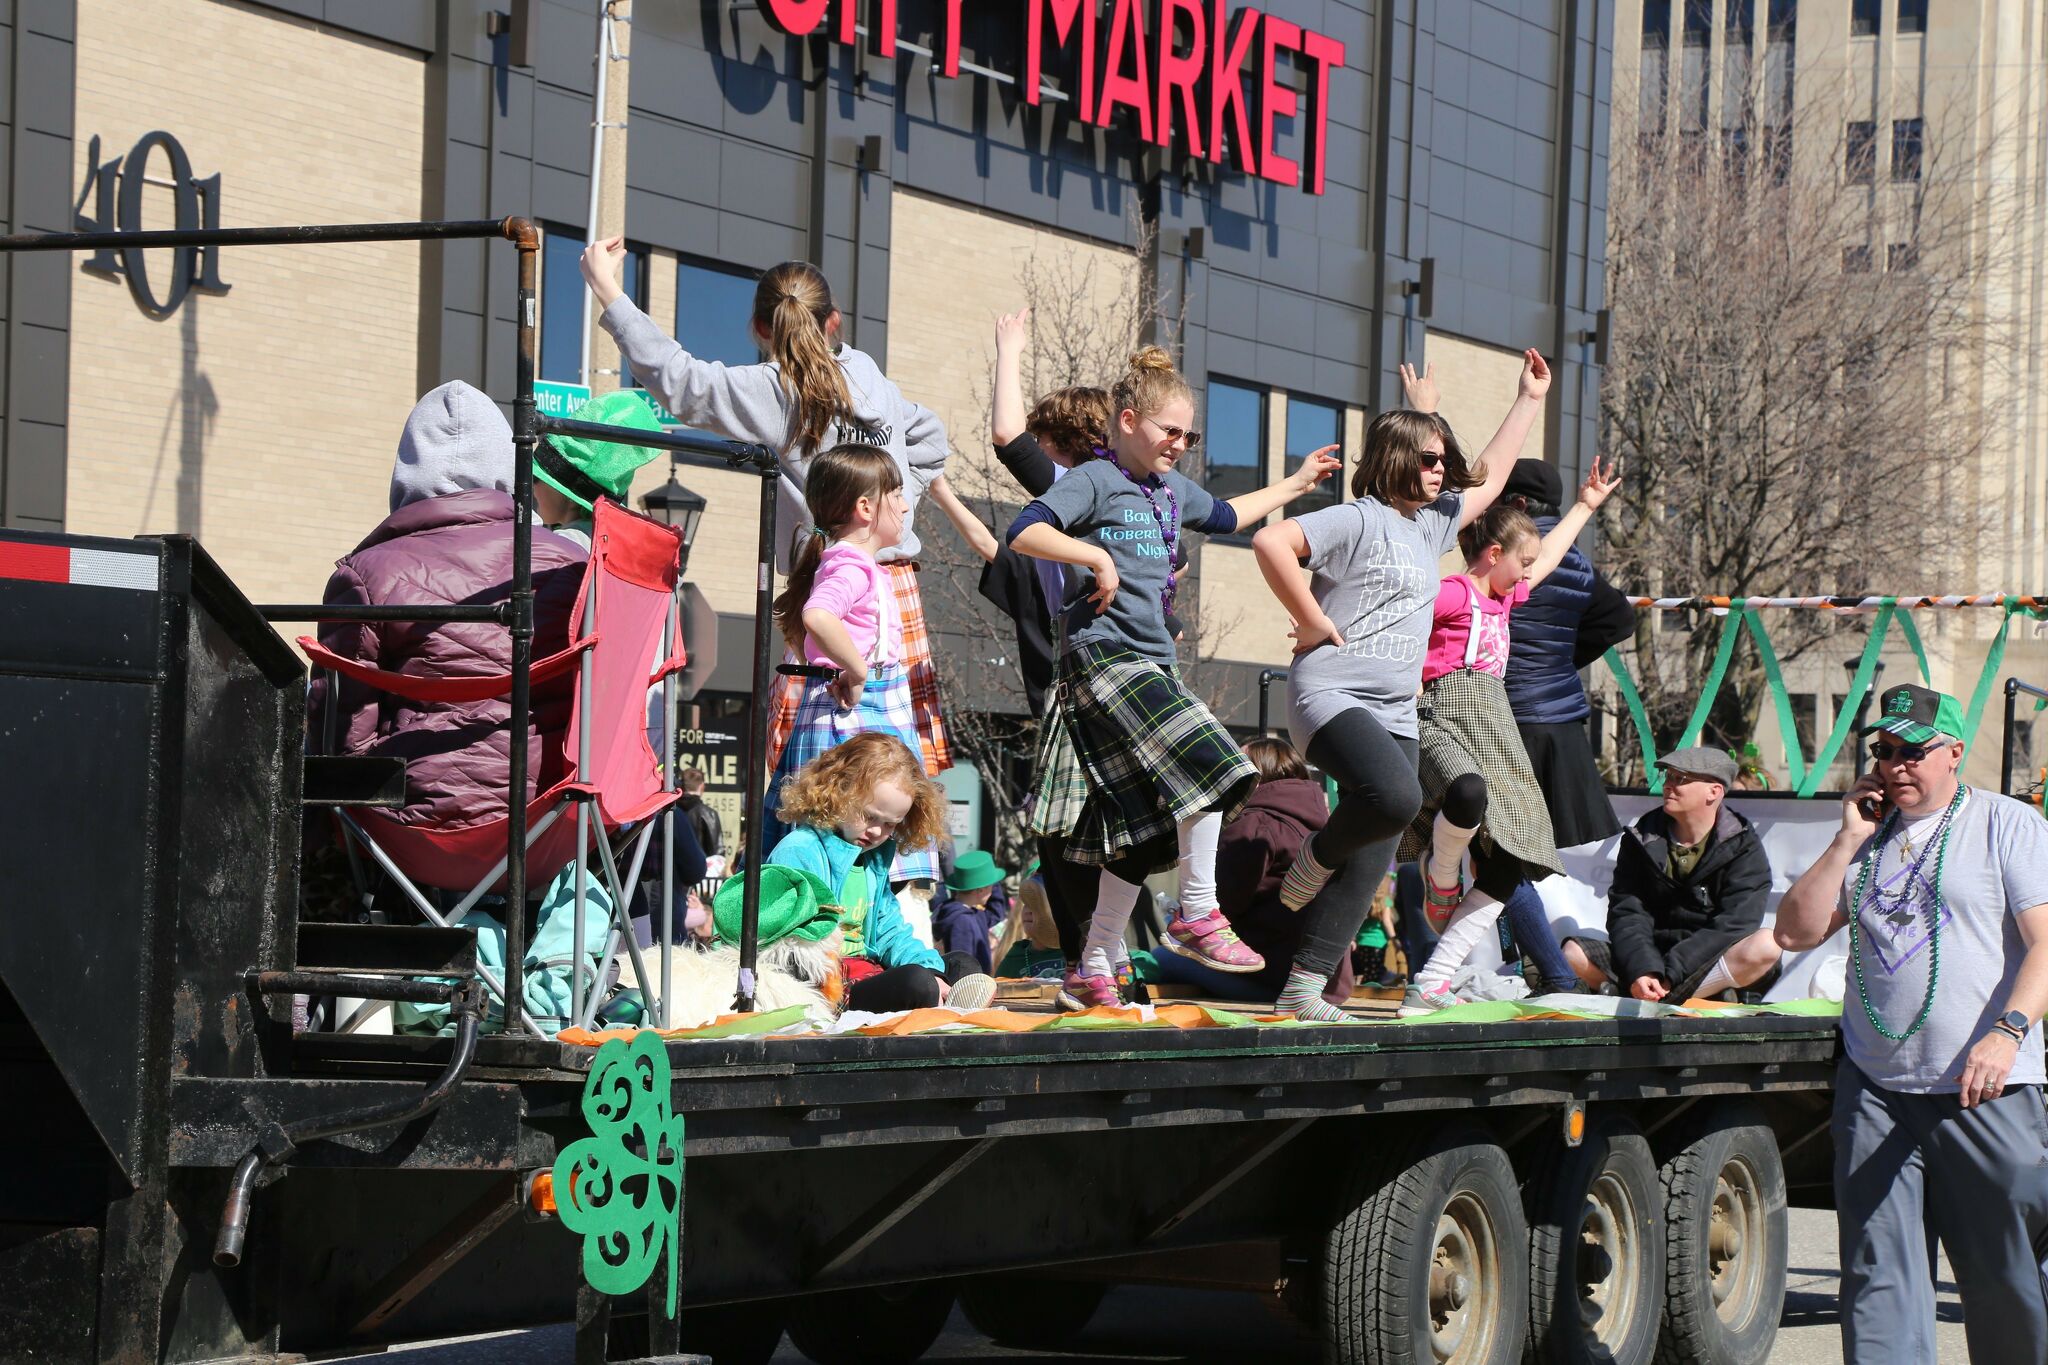 St. Patrick's Day Parade in Bay City brings in thousands of visitors